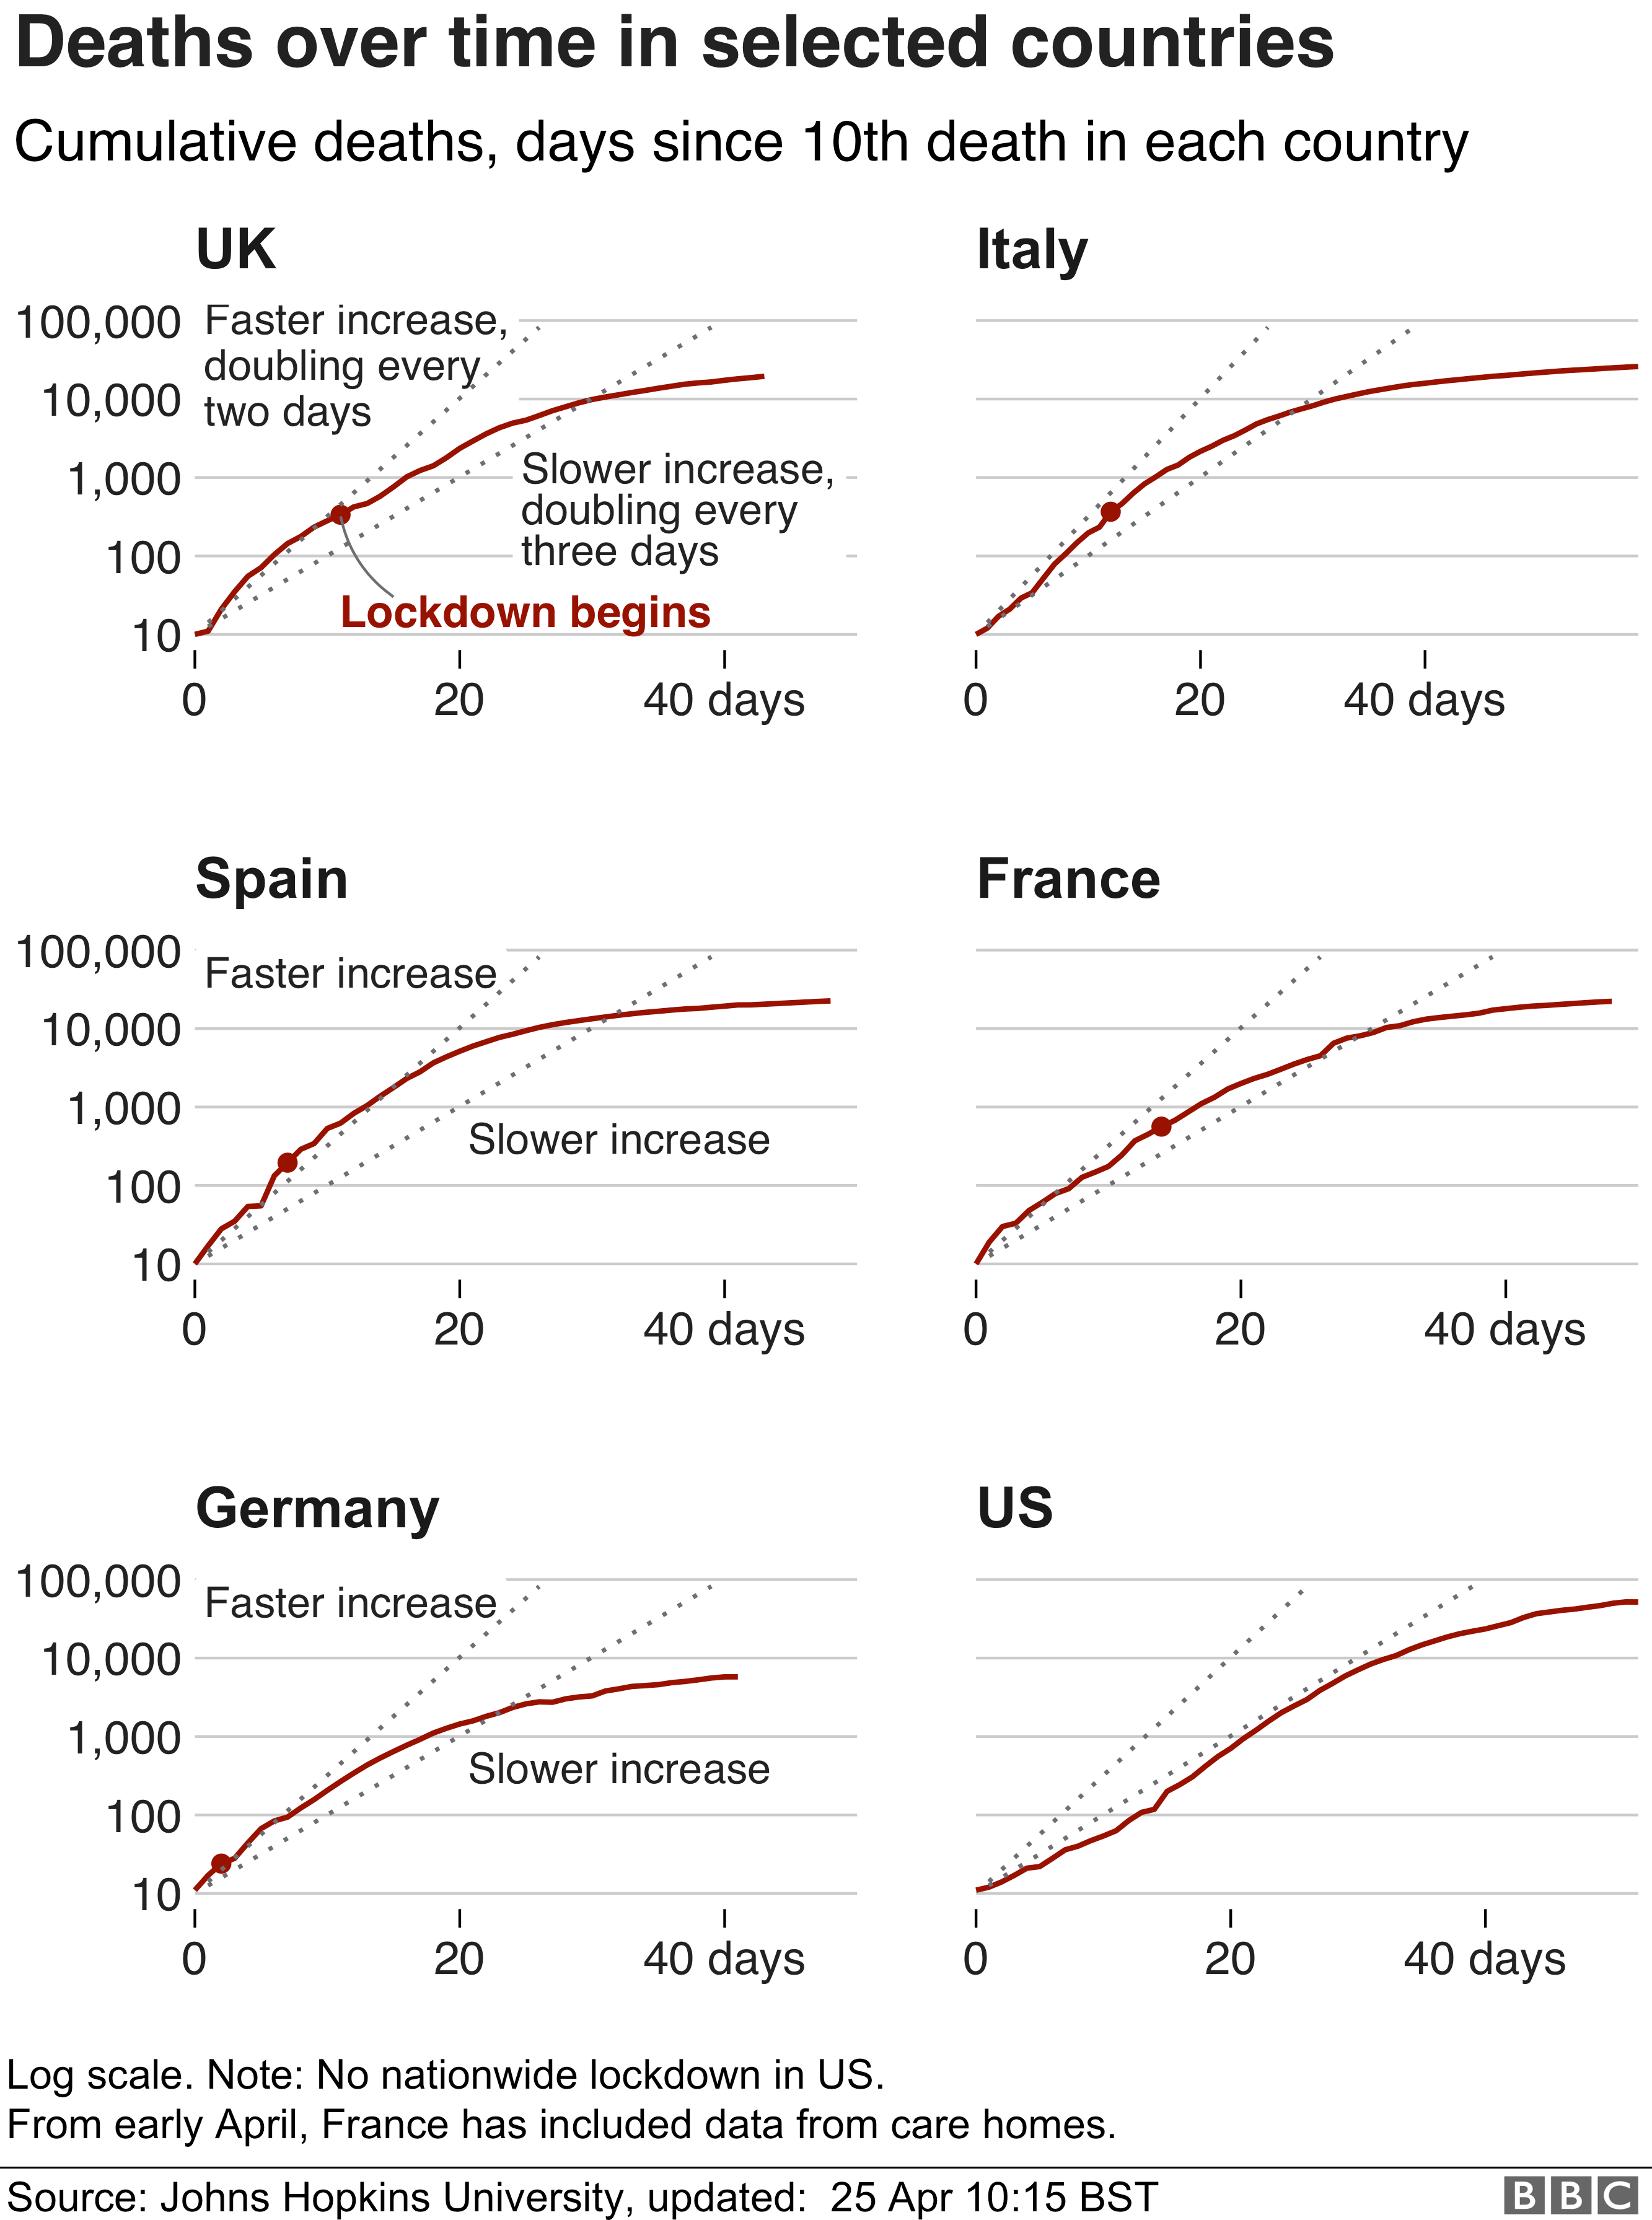 Six charts show how death rates over time in selected countries have begun to slow down